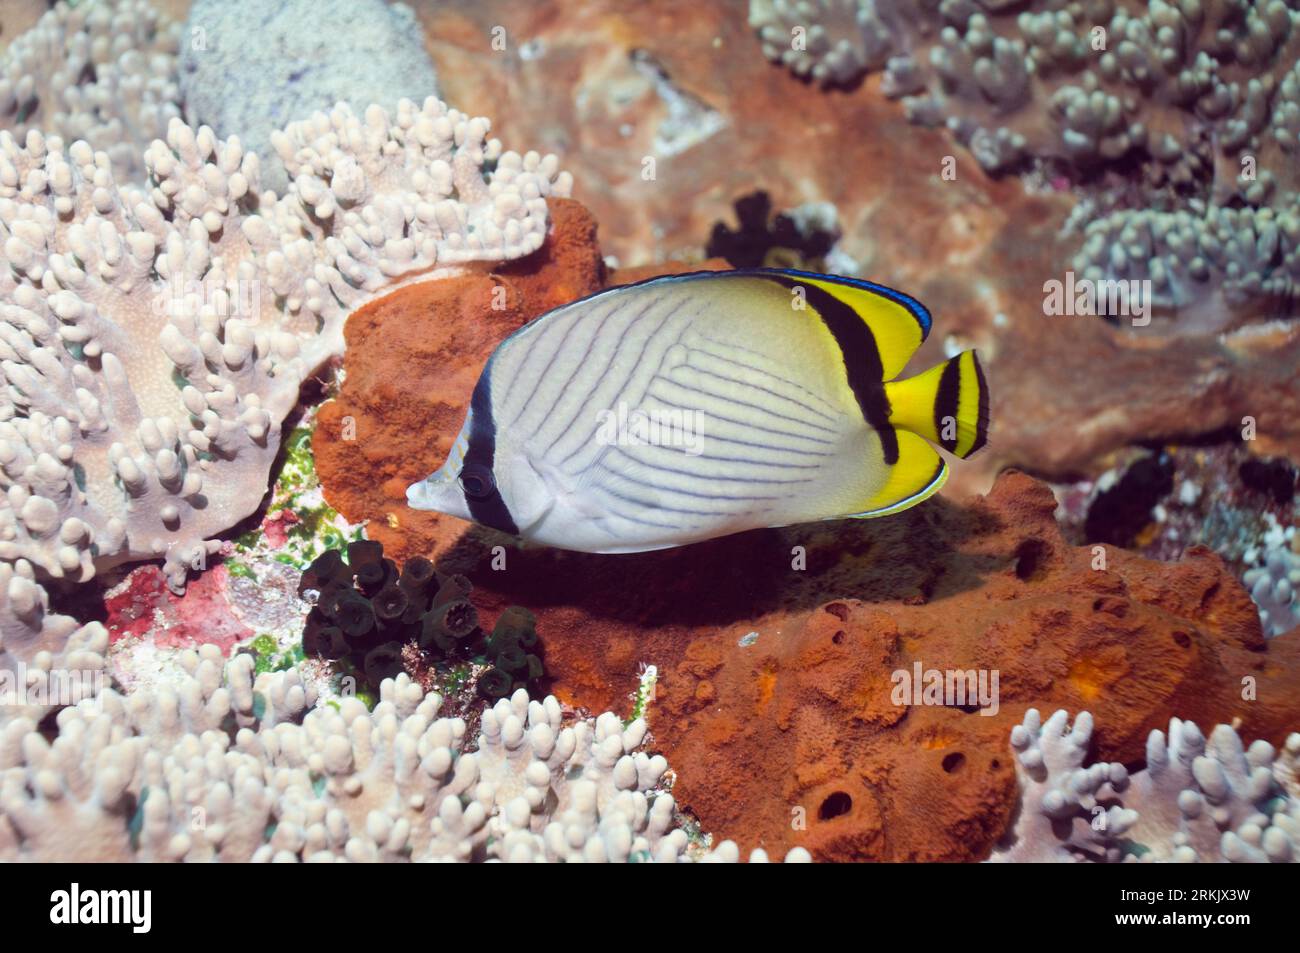 Vagabond butterflyfish (Chaetodon vagabundus) swimming over leather corals and sponges.  Indonesia. Stock Photo